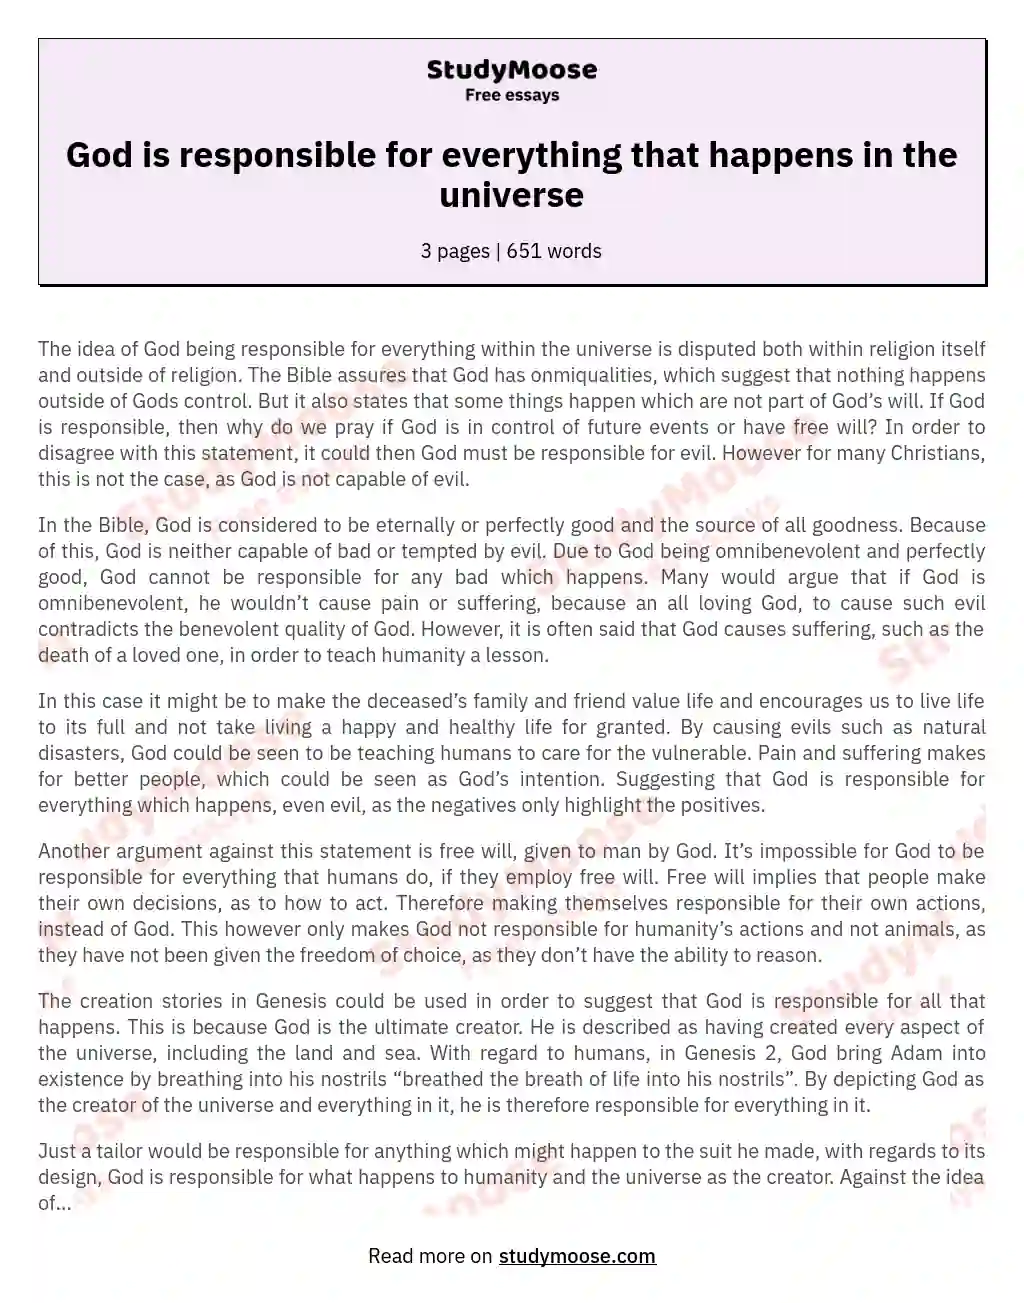 God is responsible for everything that happens in the universe